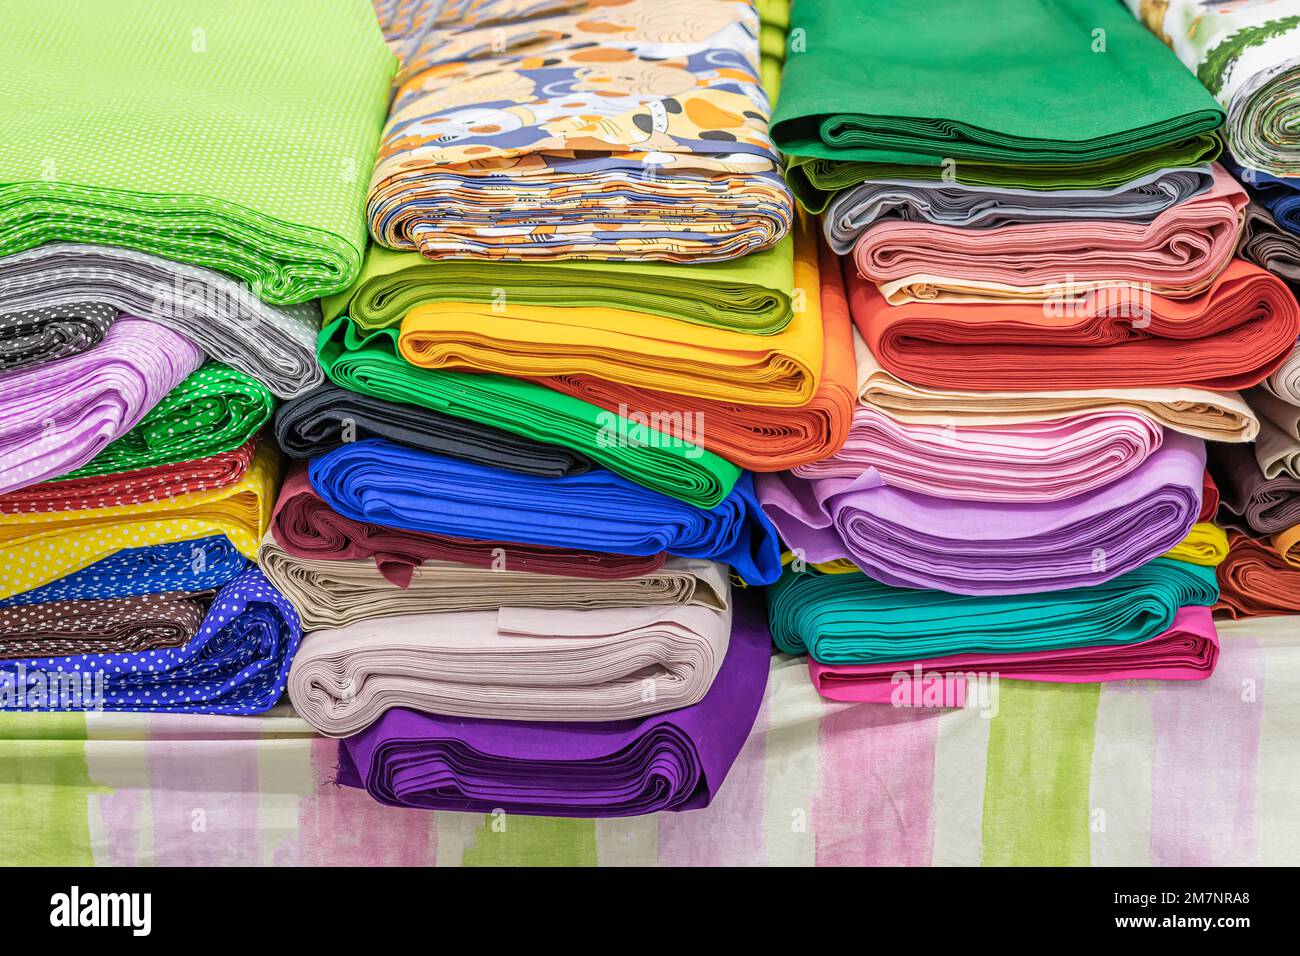 Colored textile or fabric in factory shop, store, choice of textiles for needlework and hobbies Stock Photo